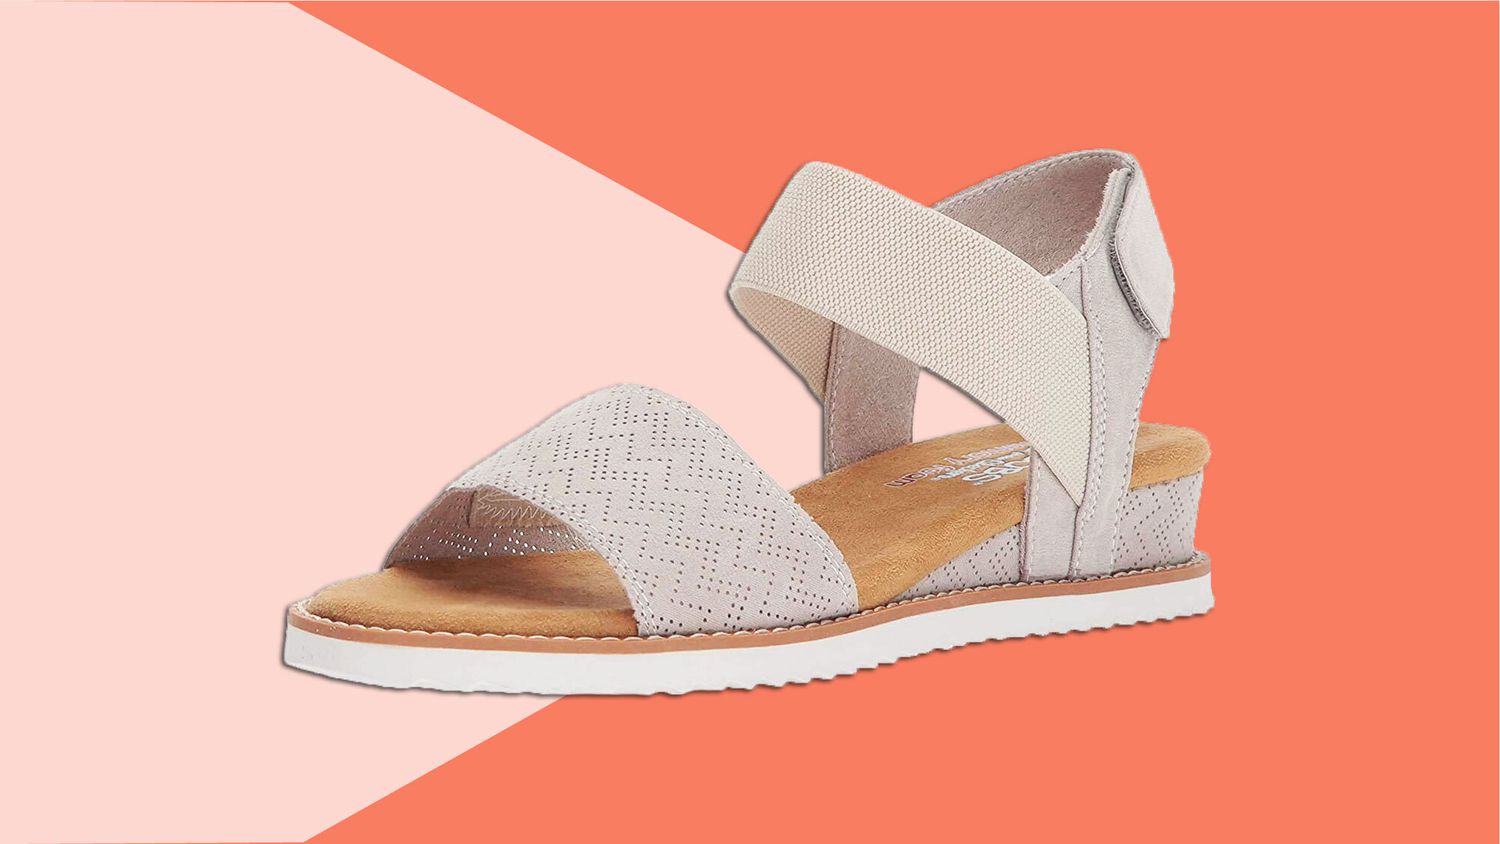 These Skechers Memory Foam Sandals Feel Supportive, According to Shoppers |  Real Simple